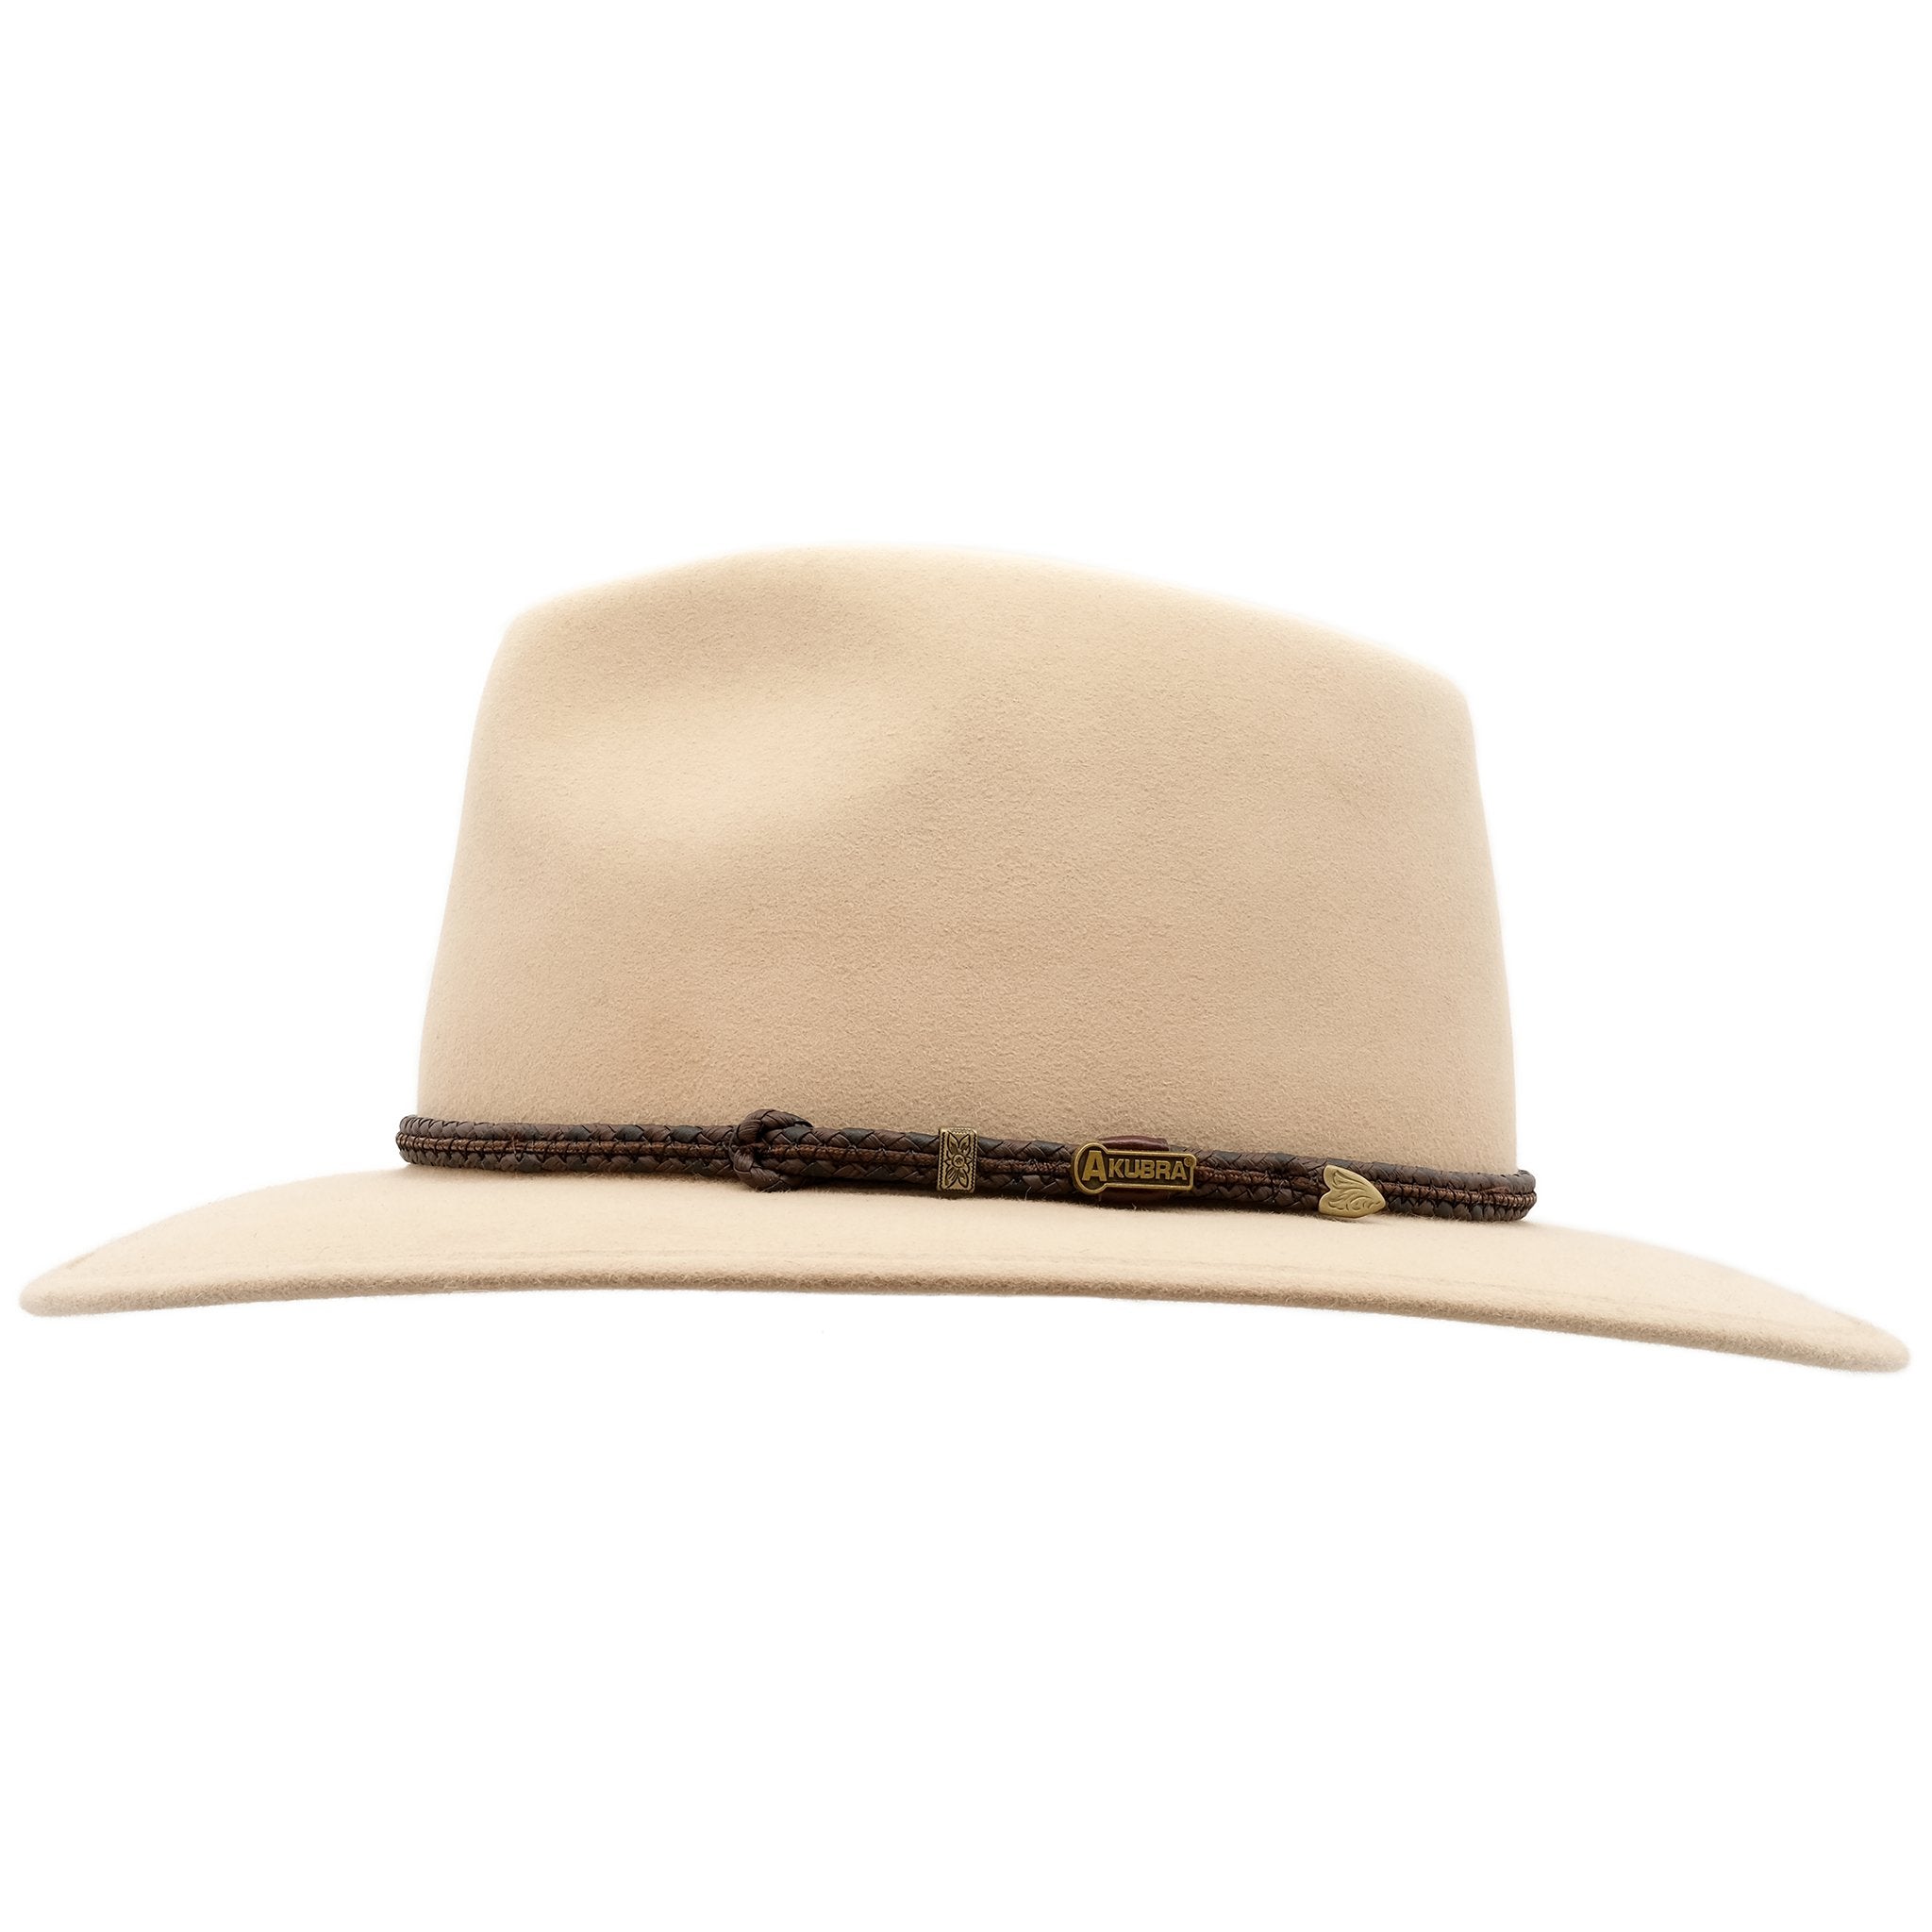 side view of sand coloured Akubra traveller style hat